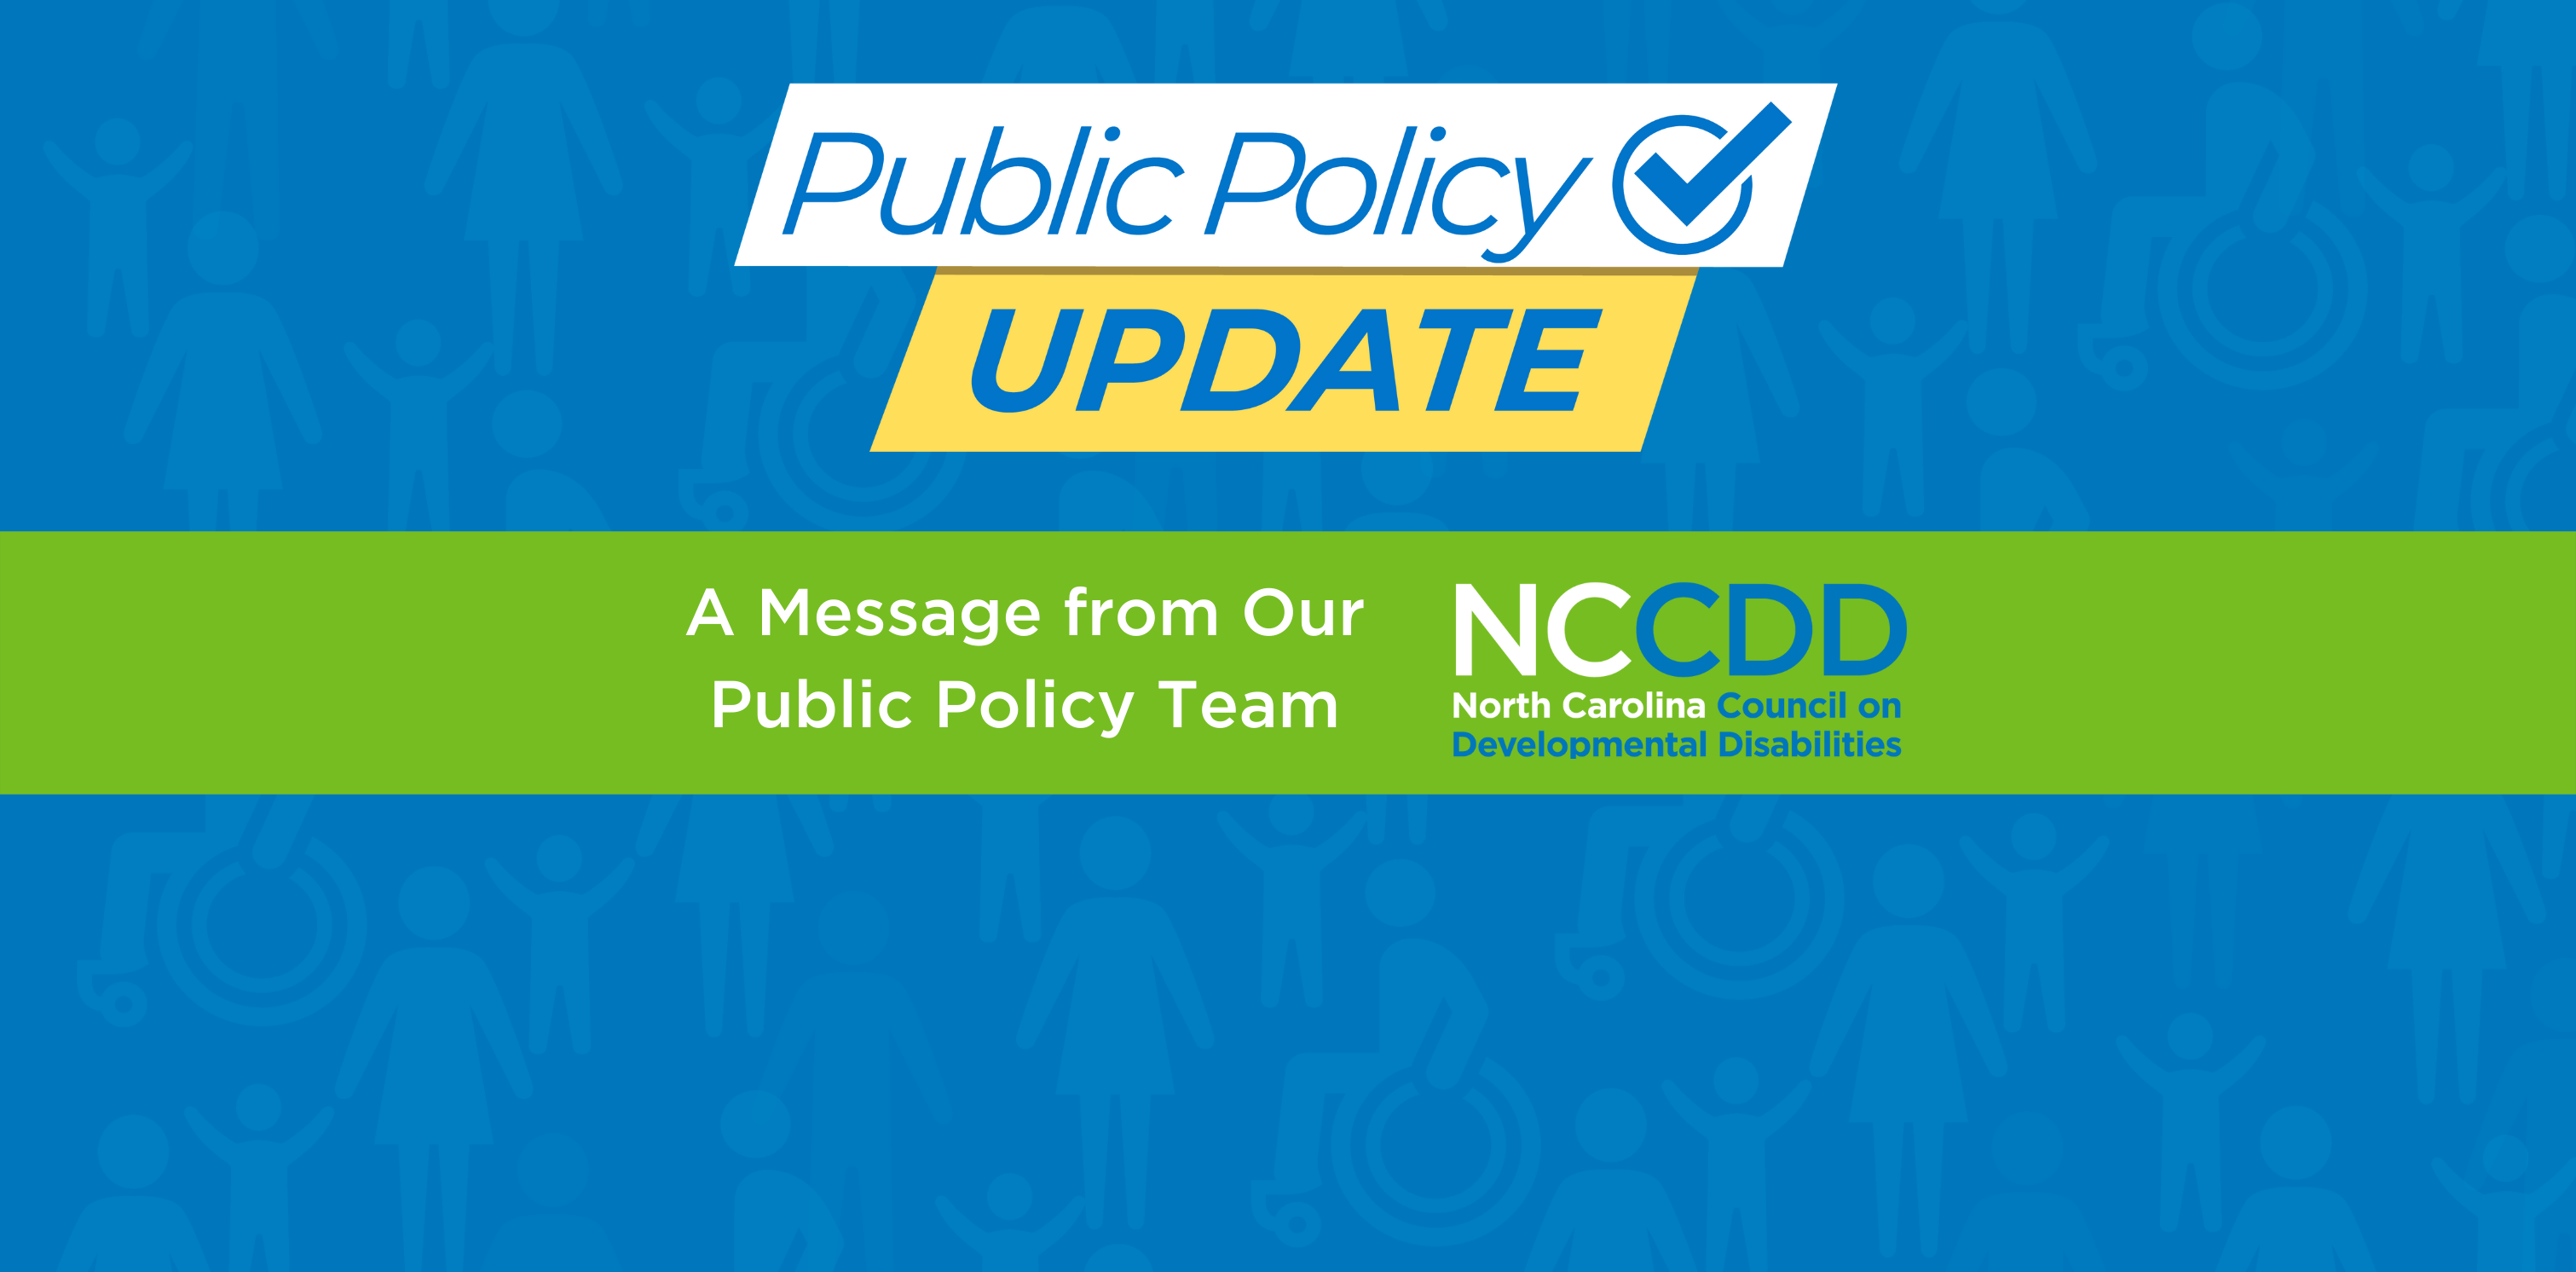 Public Policy Update - A Message from Our Public Policy Team